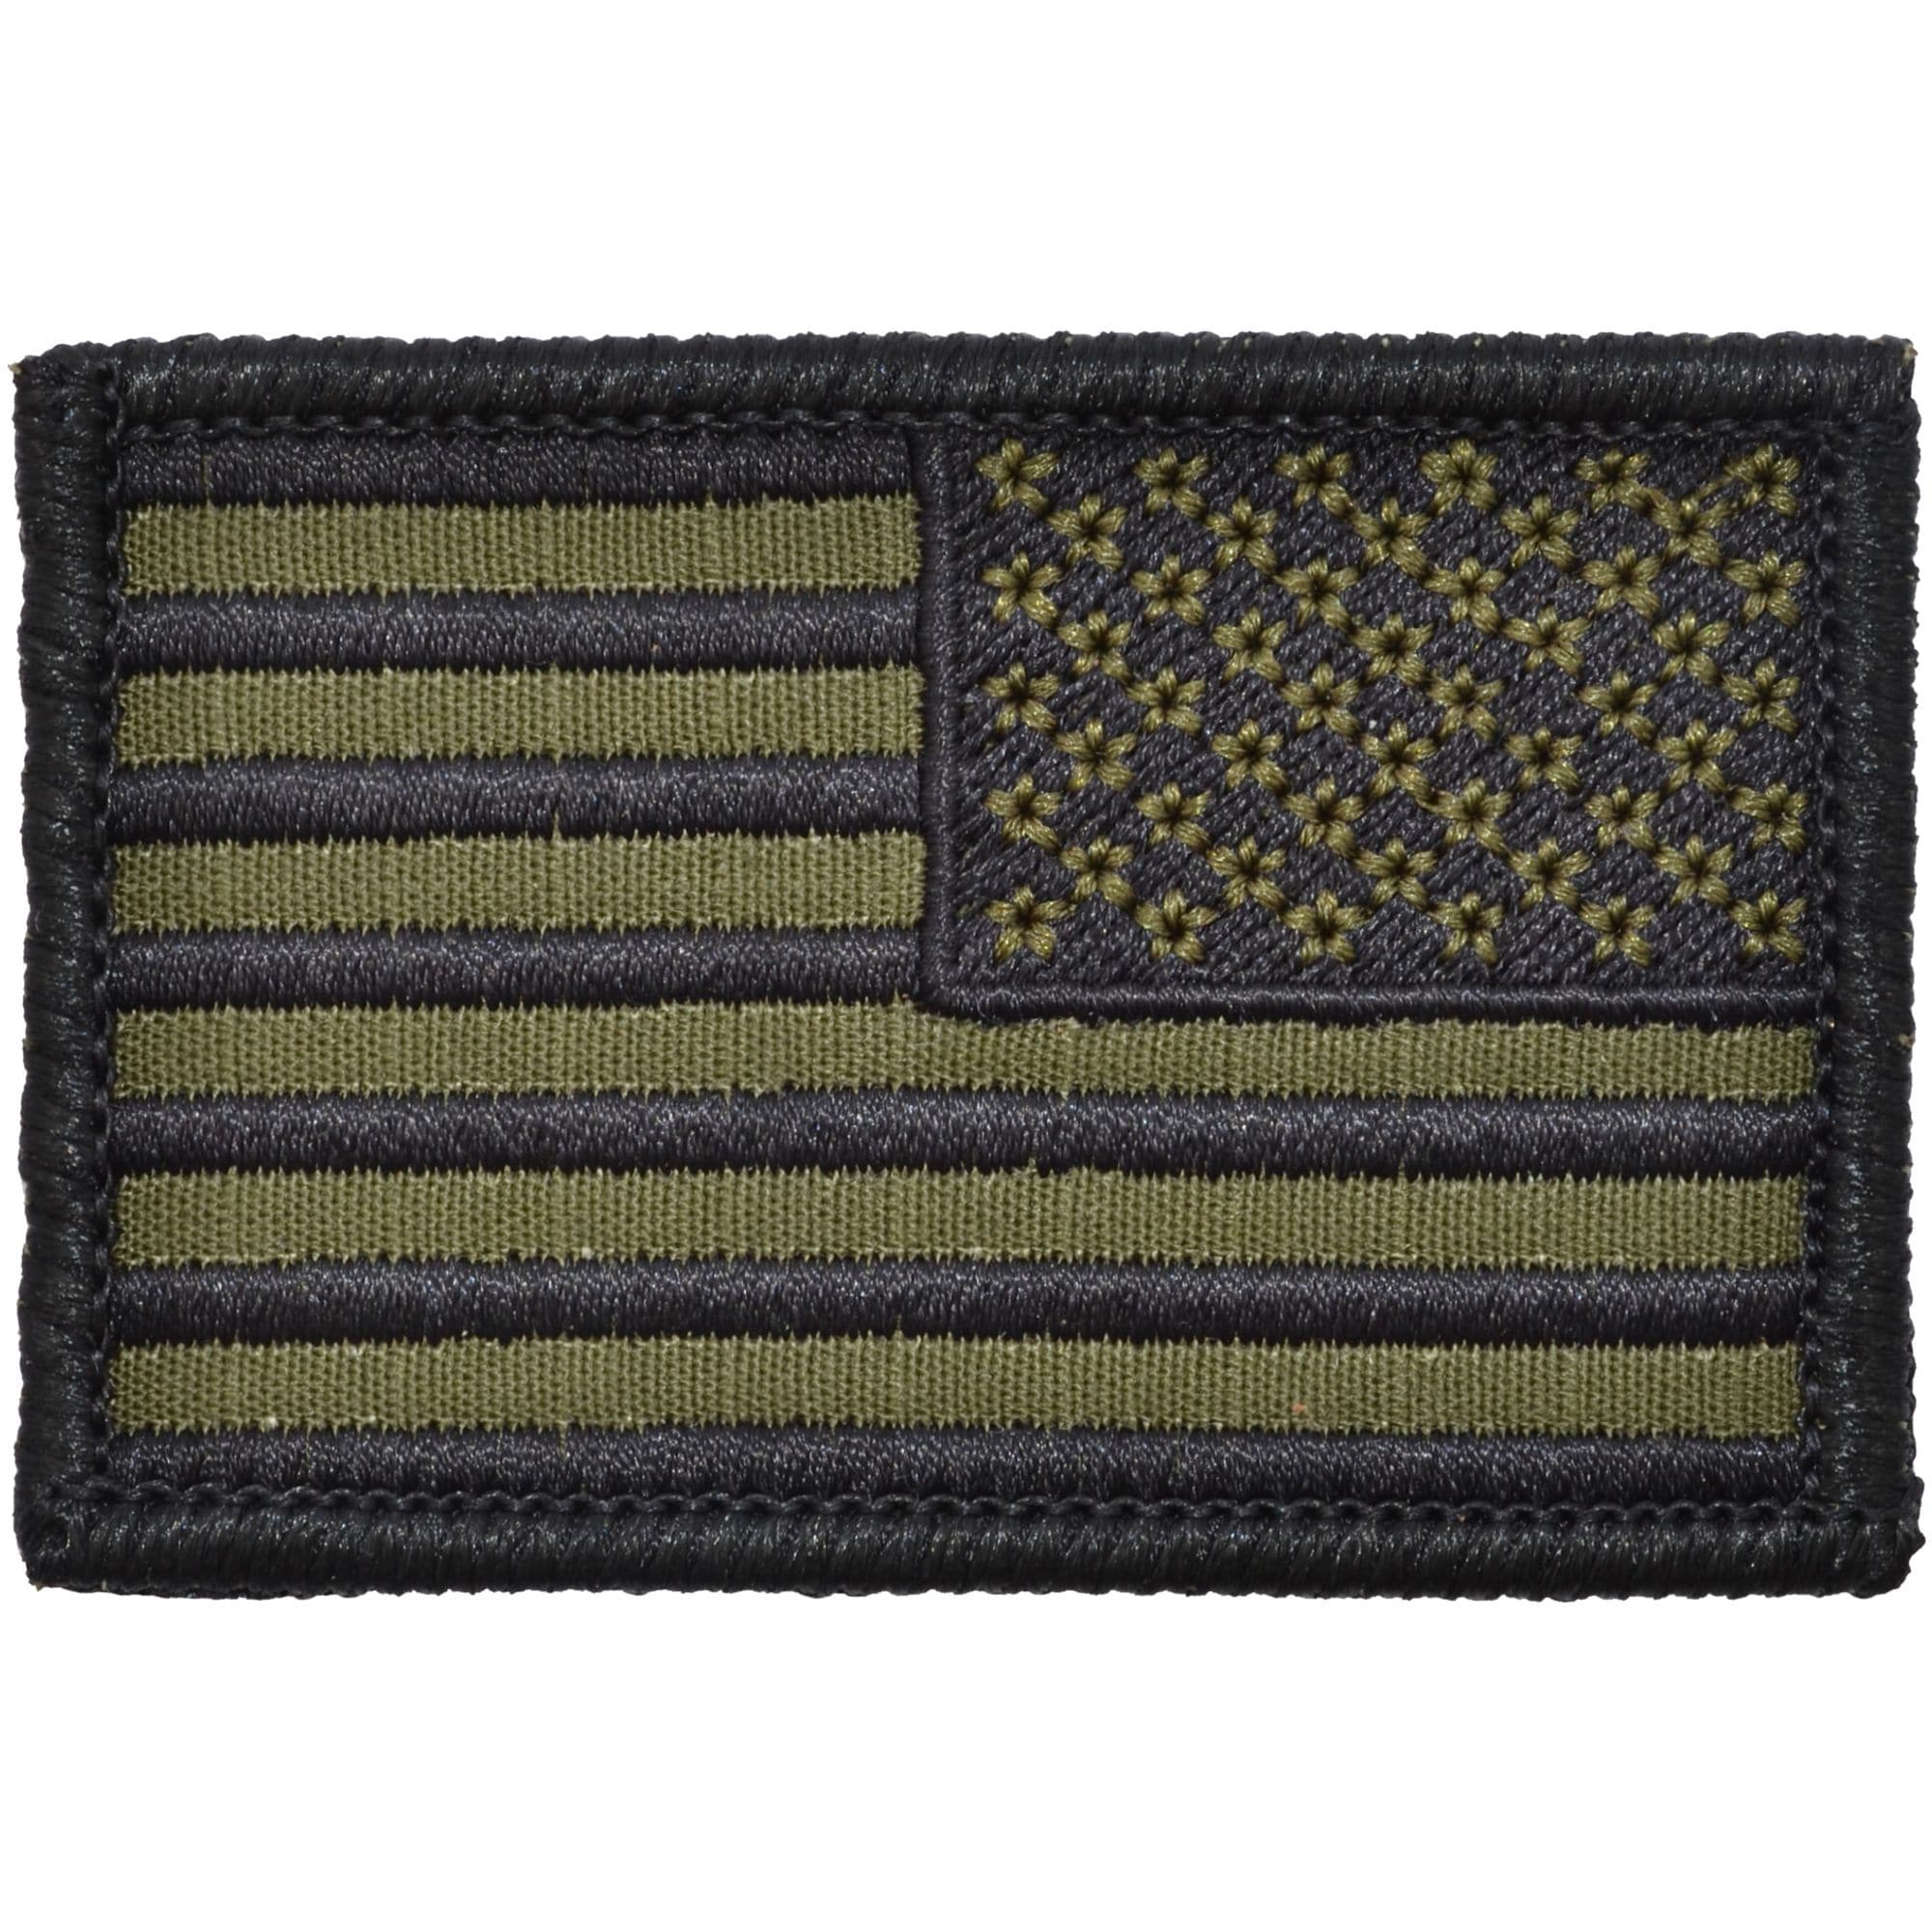 American Flag Velcro Patch (OD Green)